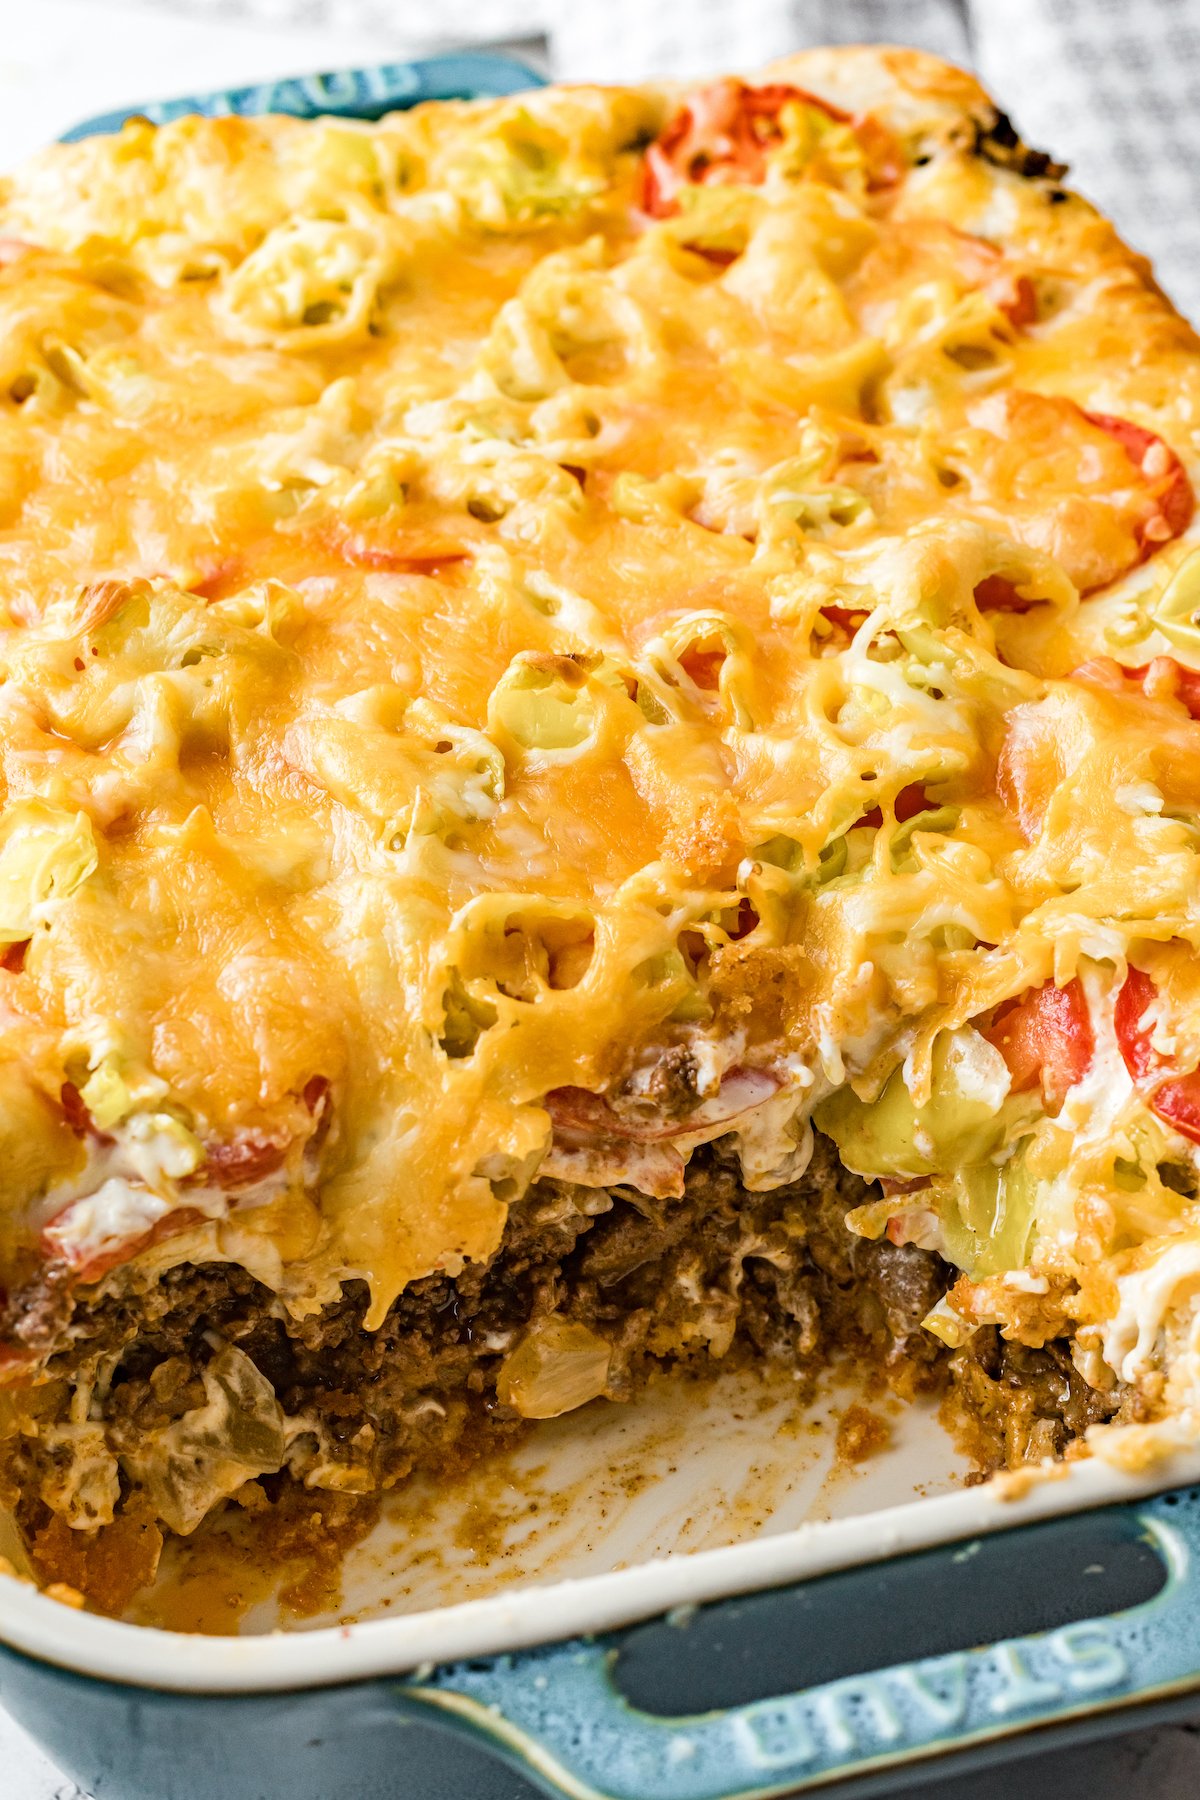 A blue Staub casserole dish filled with John Wayne casserole has a piece cut out to show the ground beef, vegetable, and cheese layers.